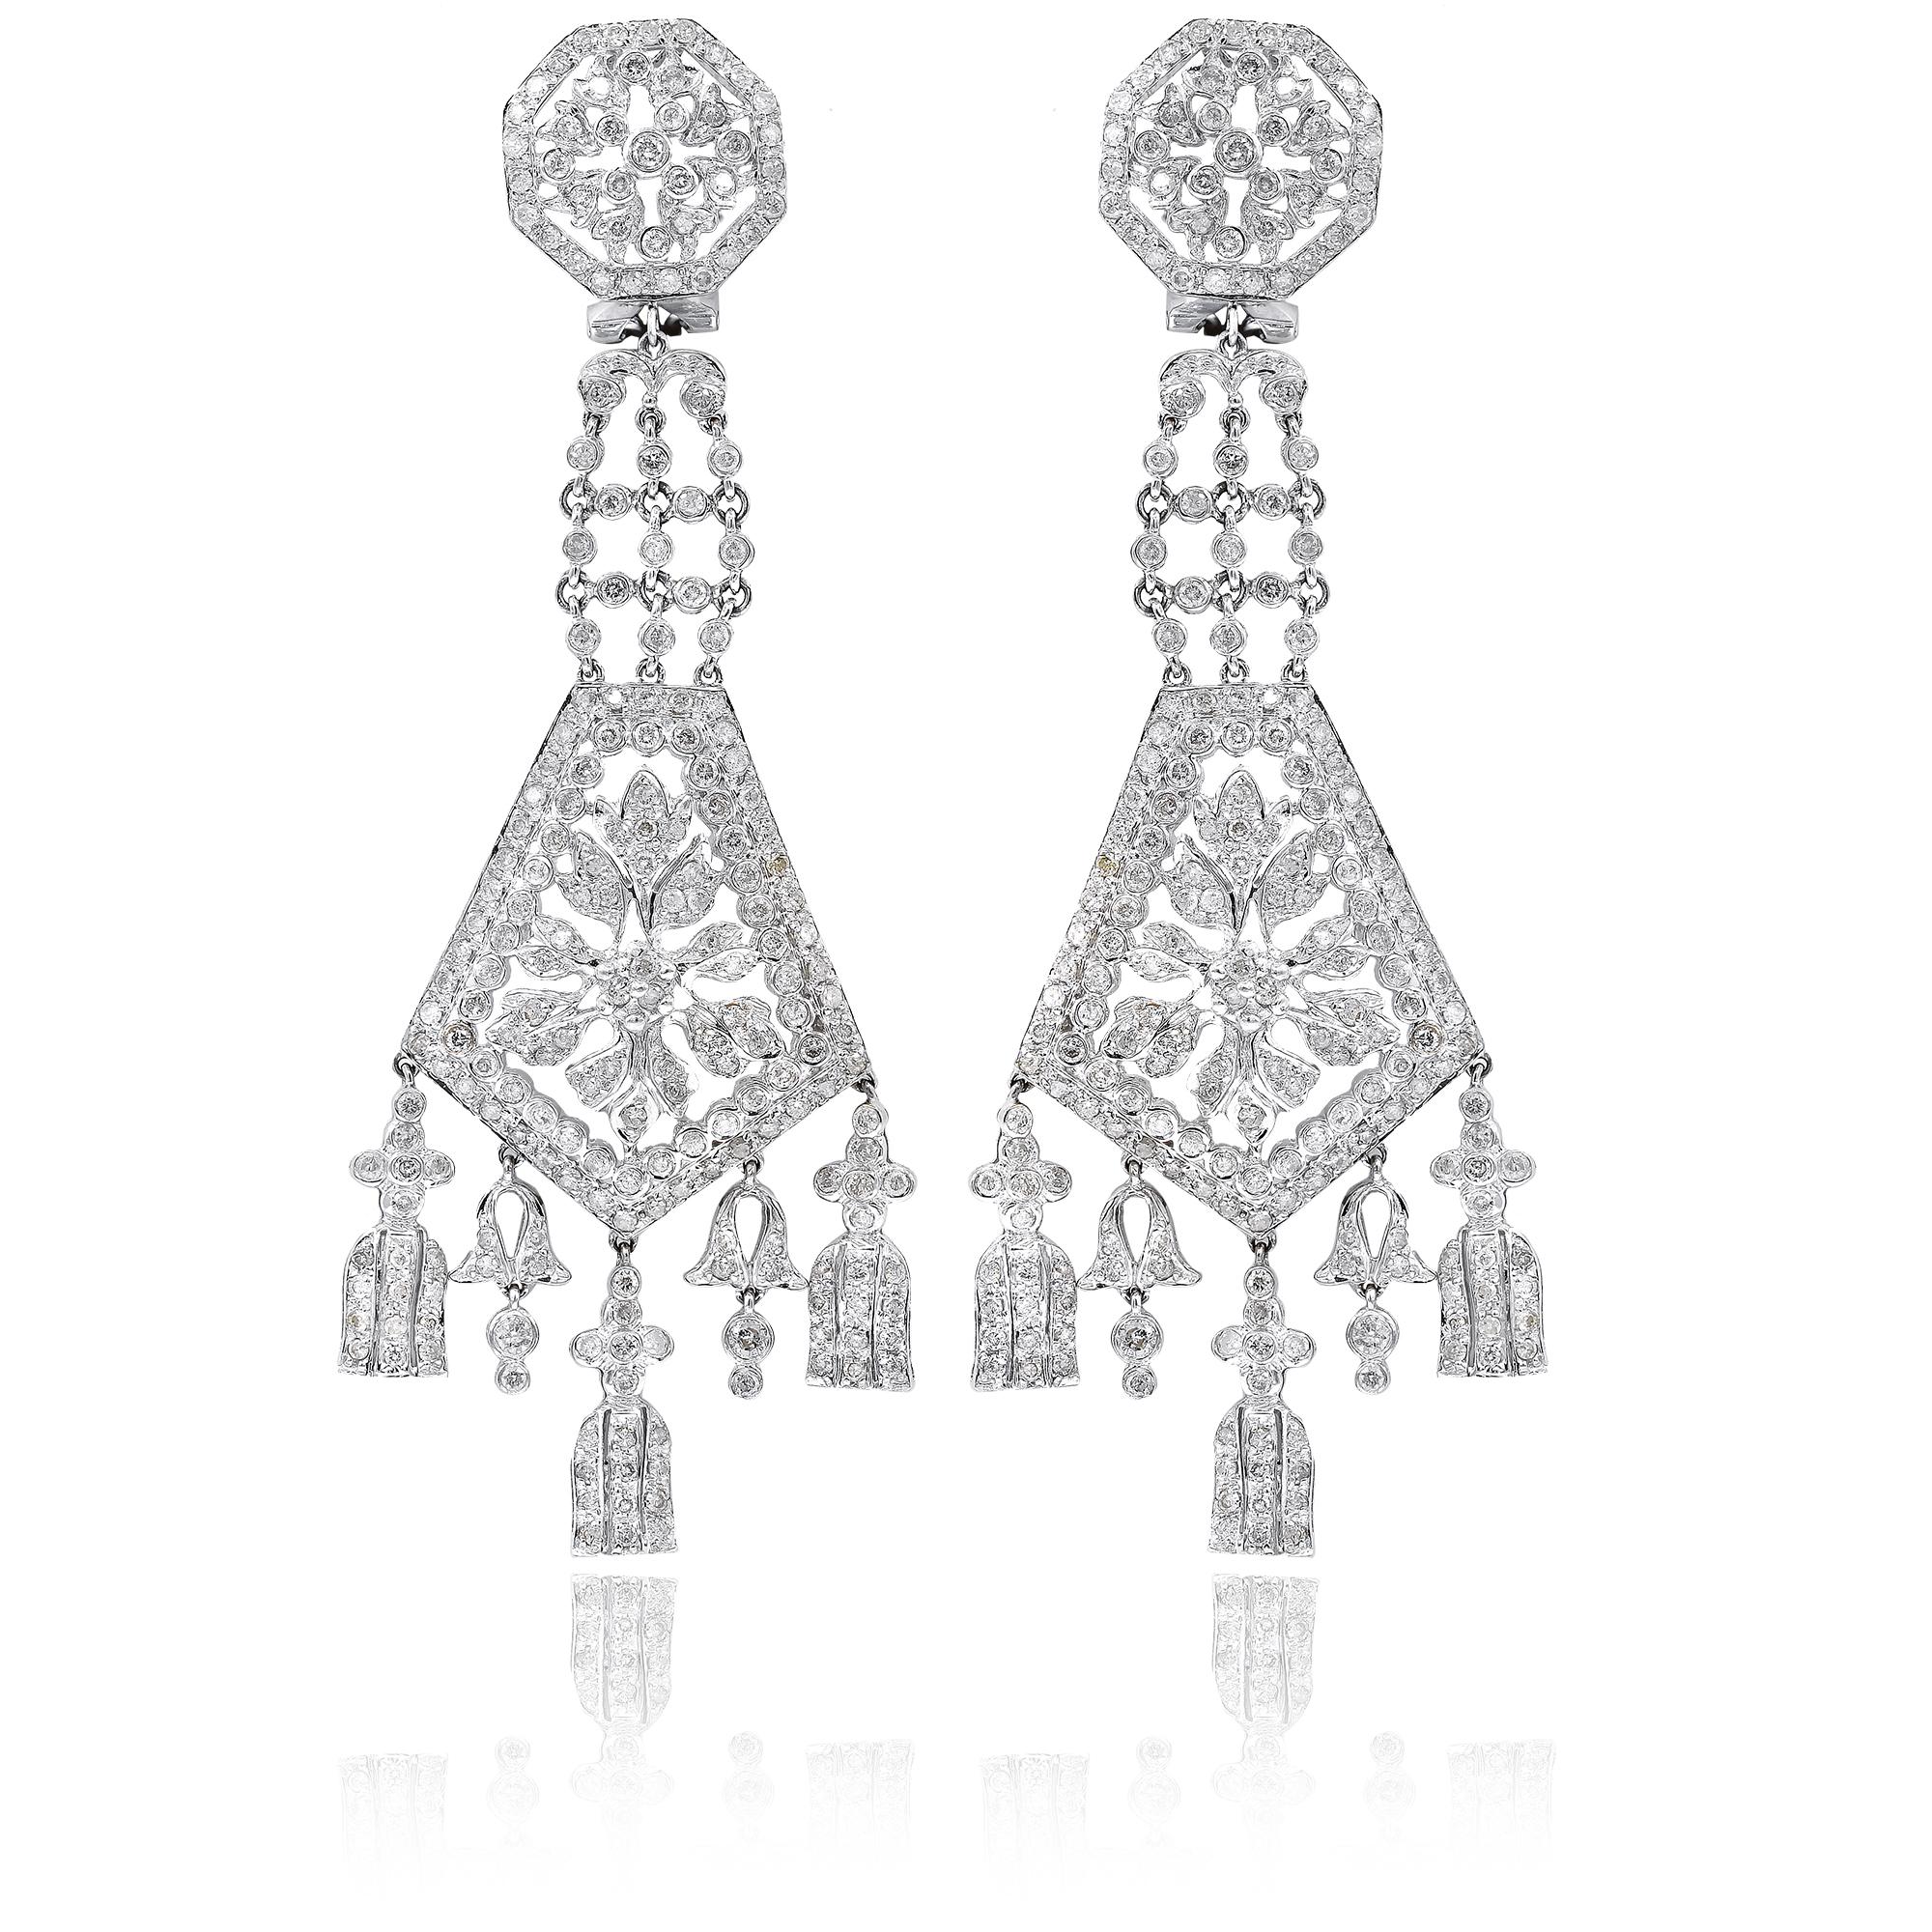 14K White Gold Diamond Earrings featuring 7.00 Carat T.W. of Natural Diamonds

Underline your look with this sharp 14K White Gold Diamond Earrings. High quality Diamonds. This Earrings will underline your exquisite look for any occasion.

. is a